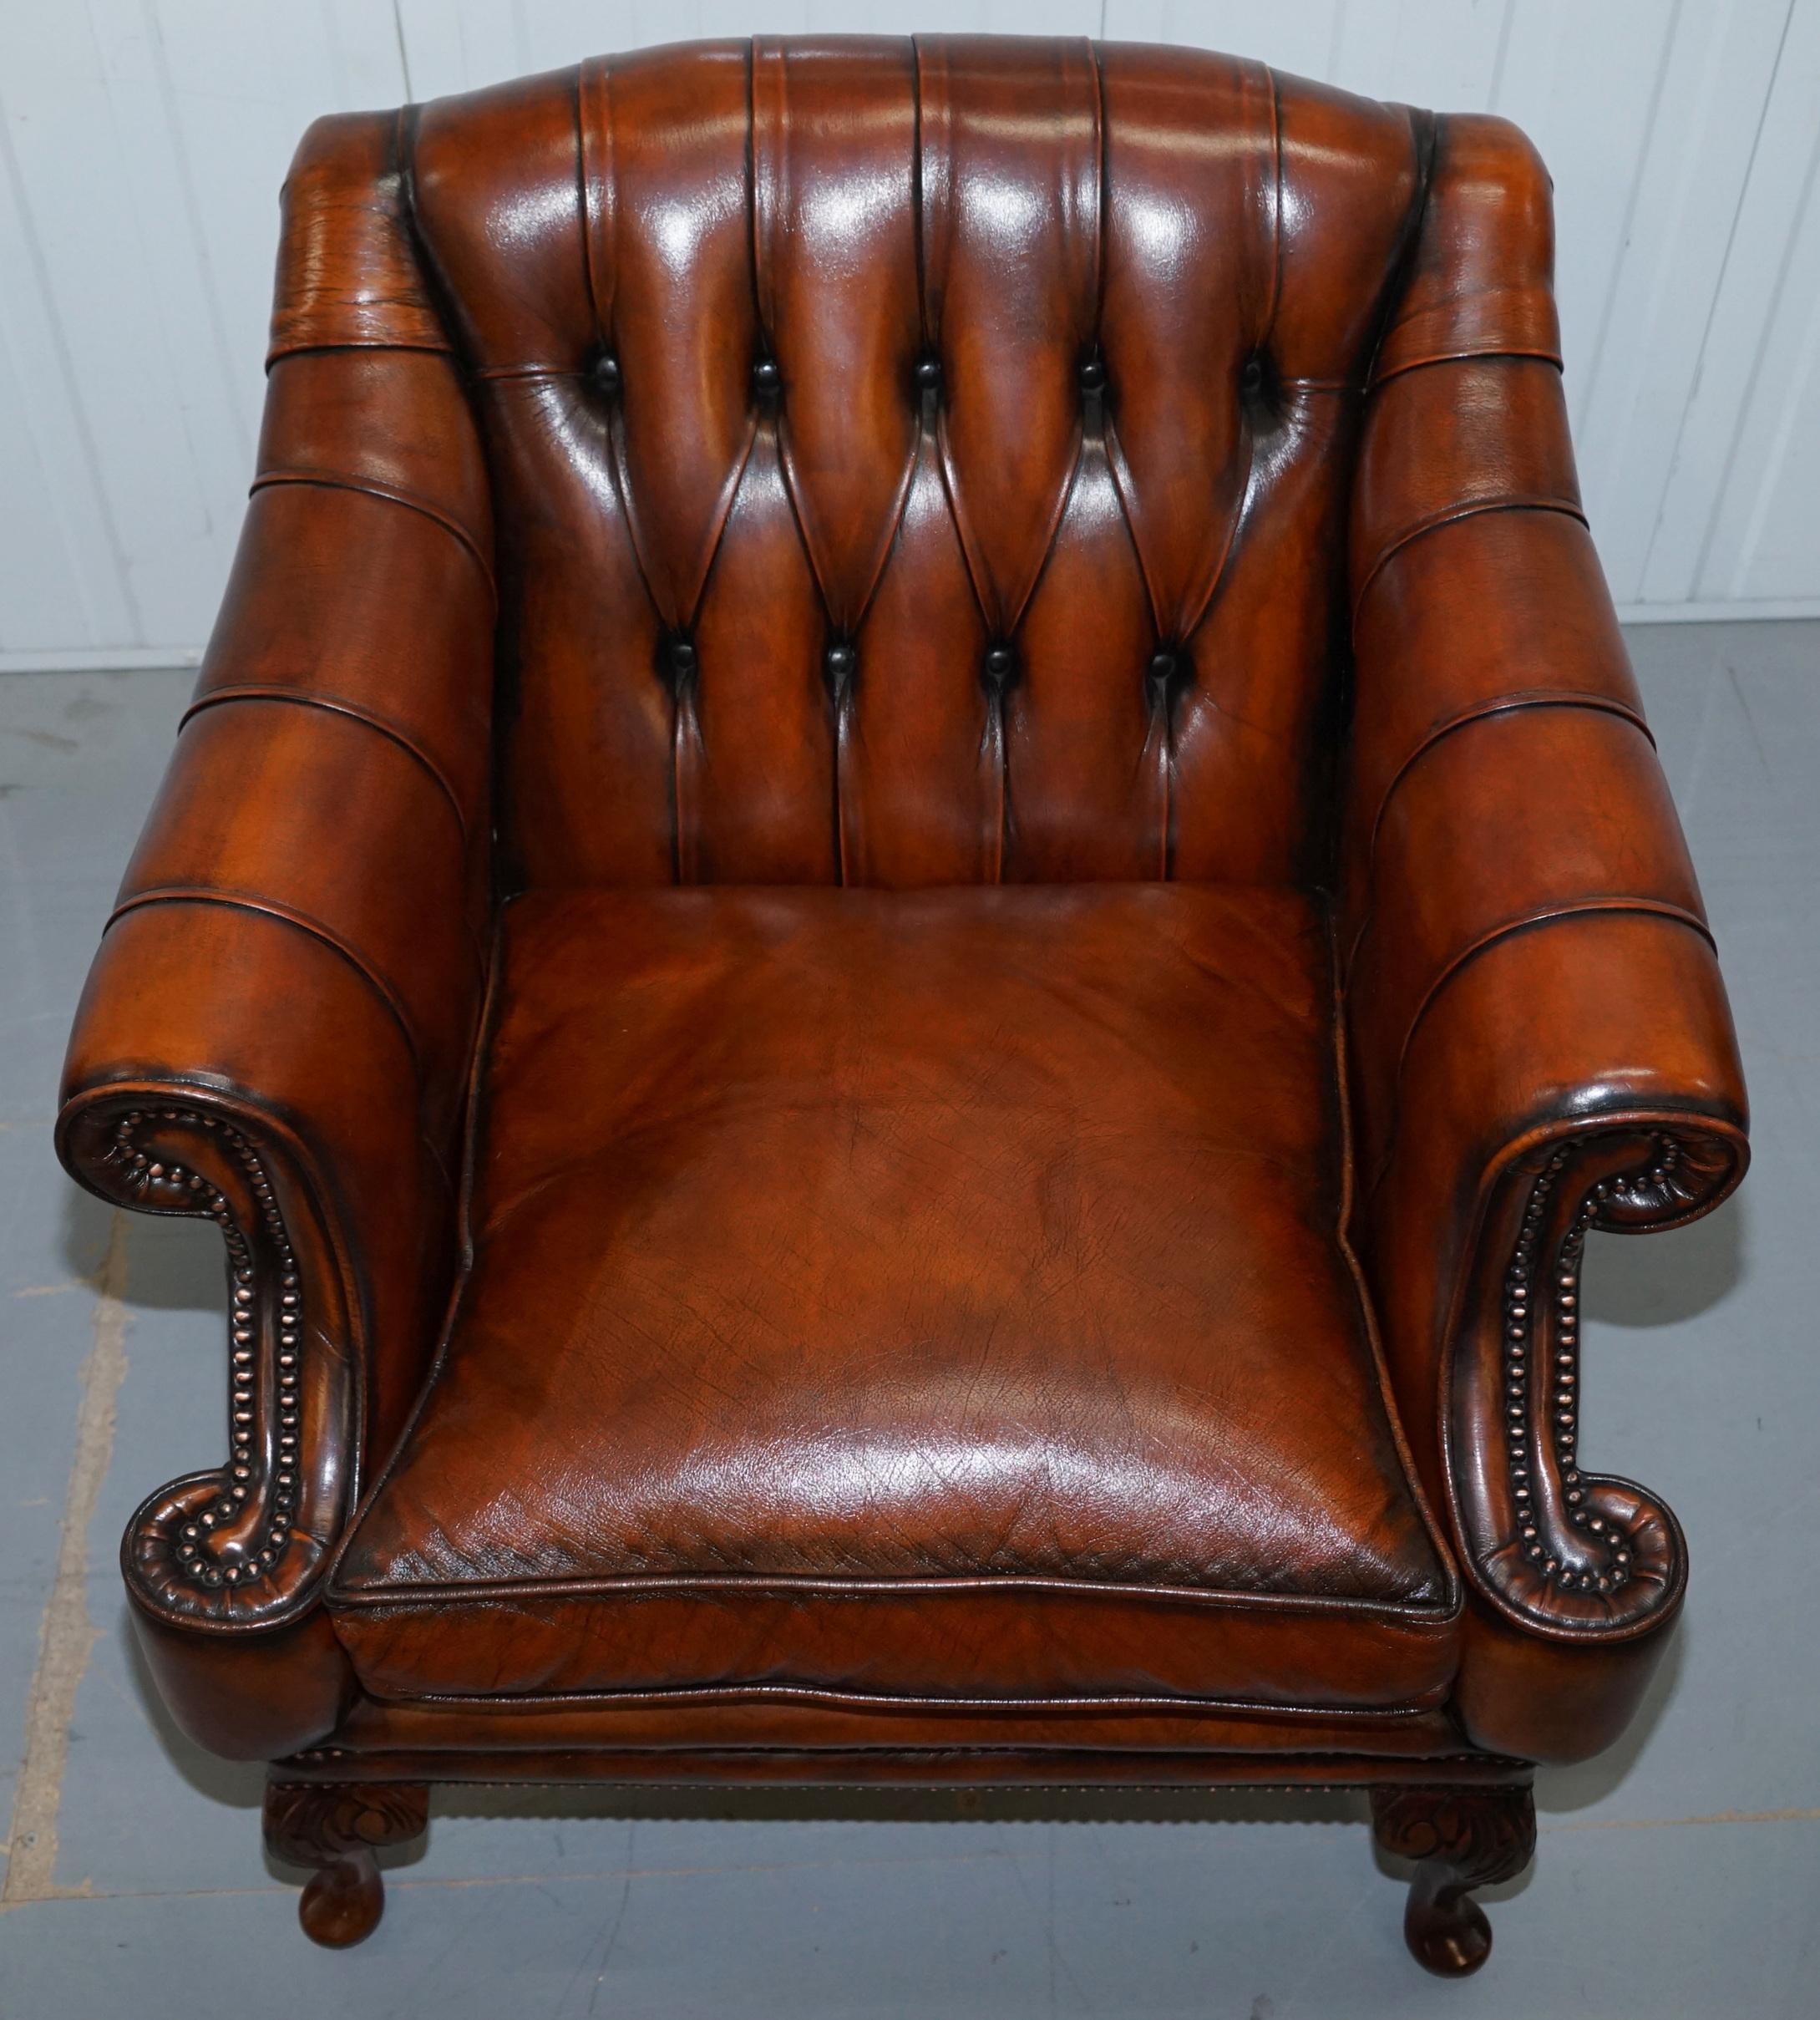 Hand-Crafted Restored Lutyen's Style Viceroy's Chesterfield Brown Leather Sofa and Armchairs